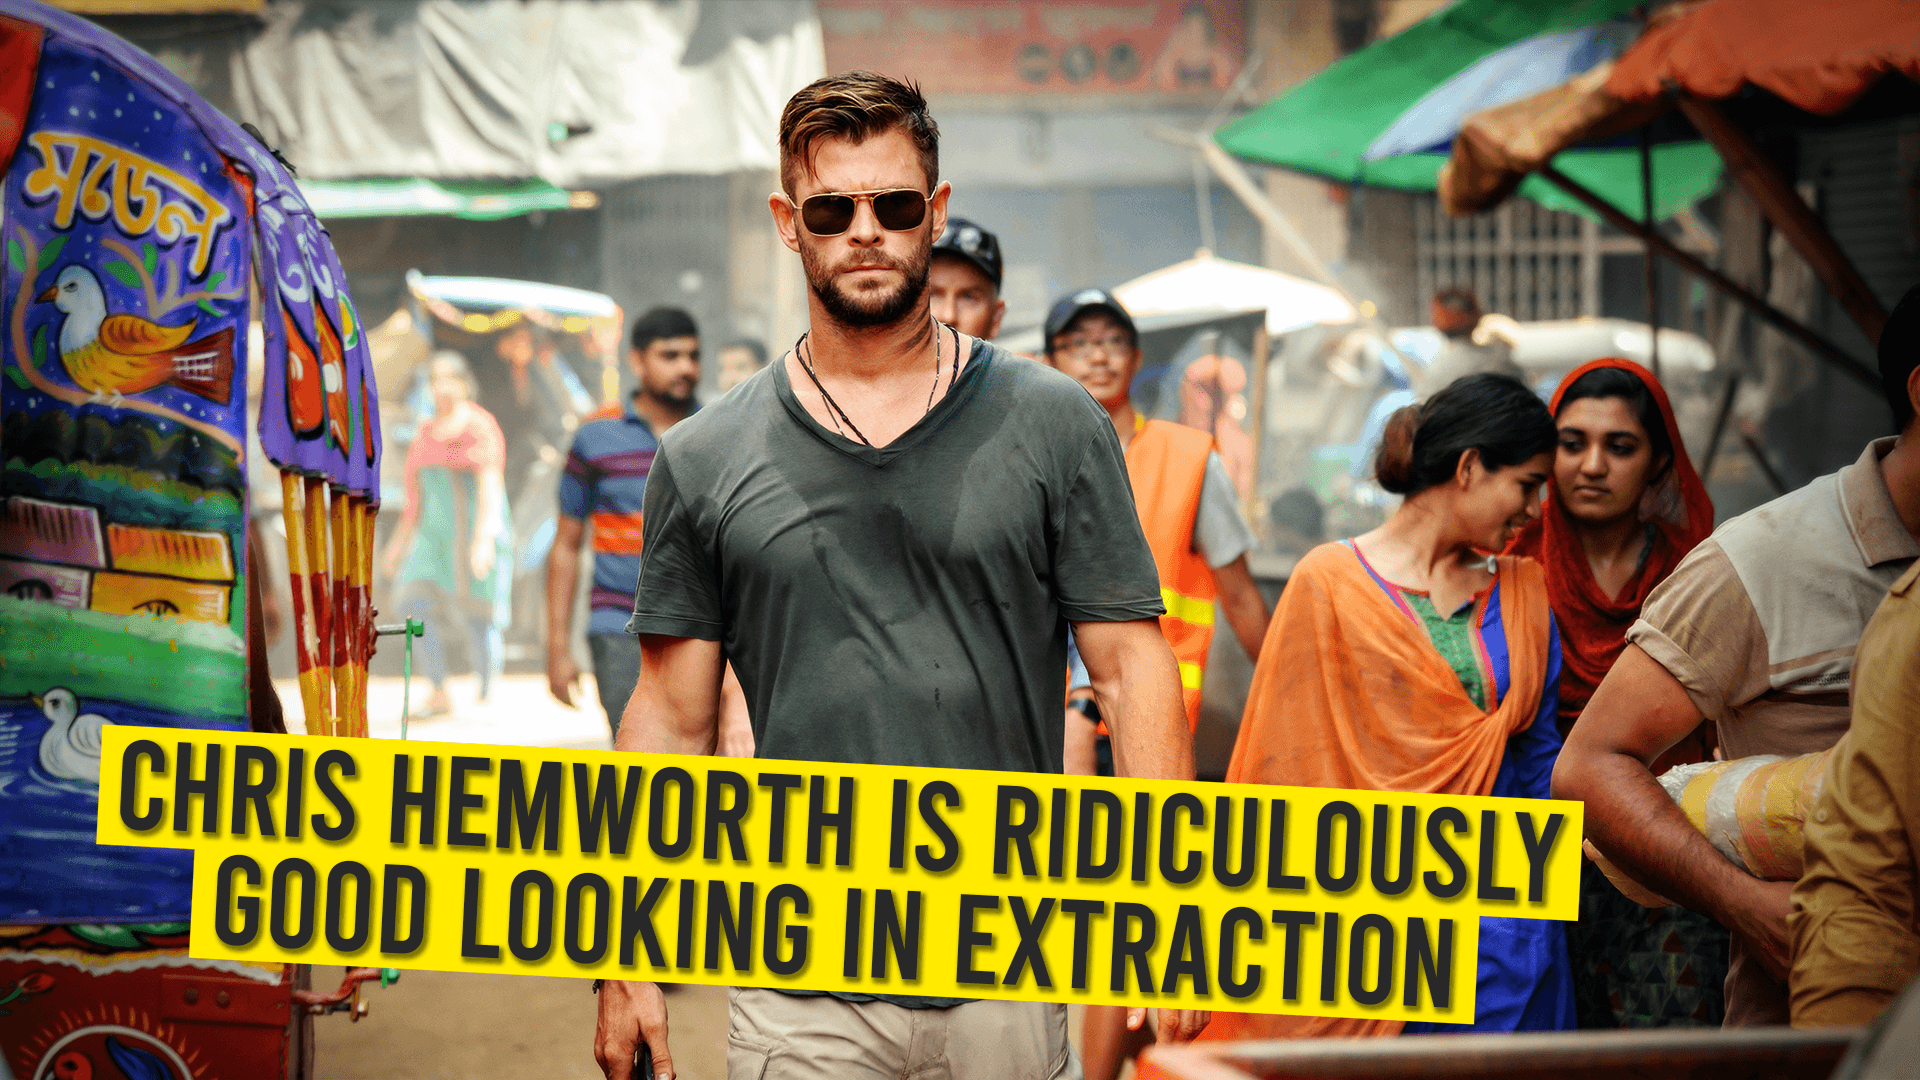 Chris Hemworth Is Ridiculously Good Looking In Extraction